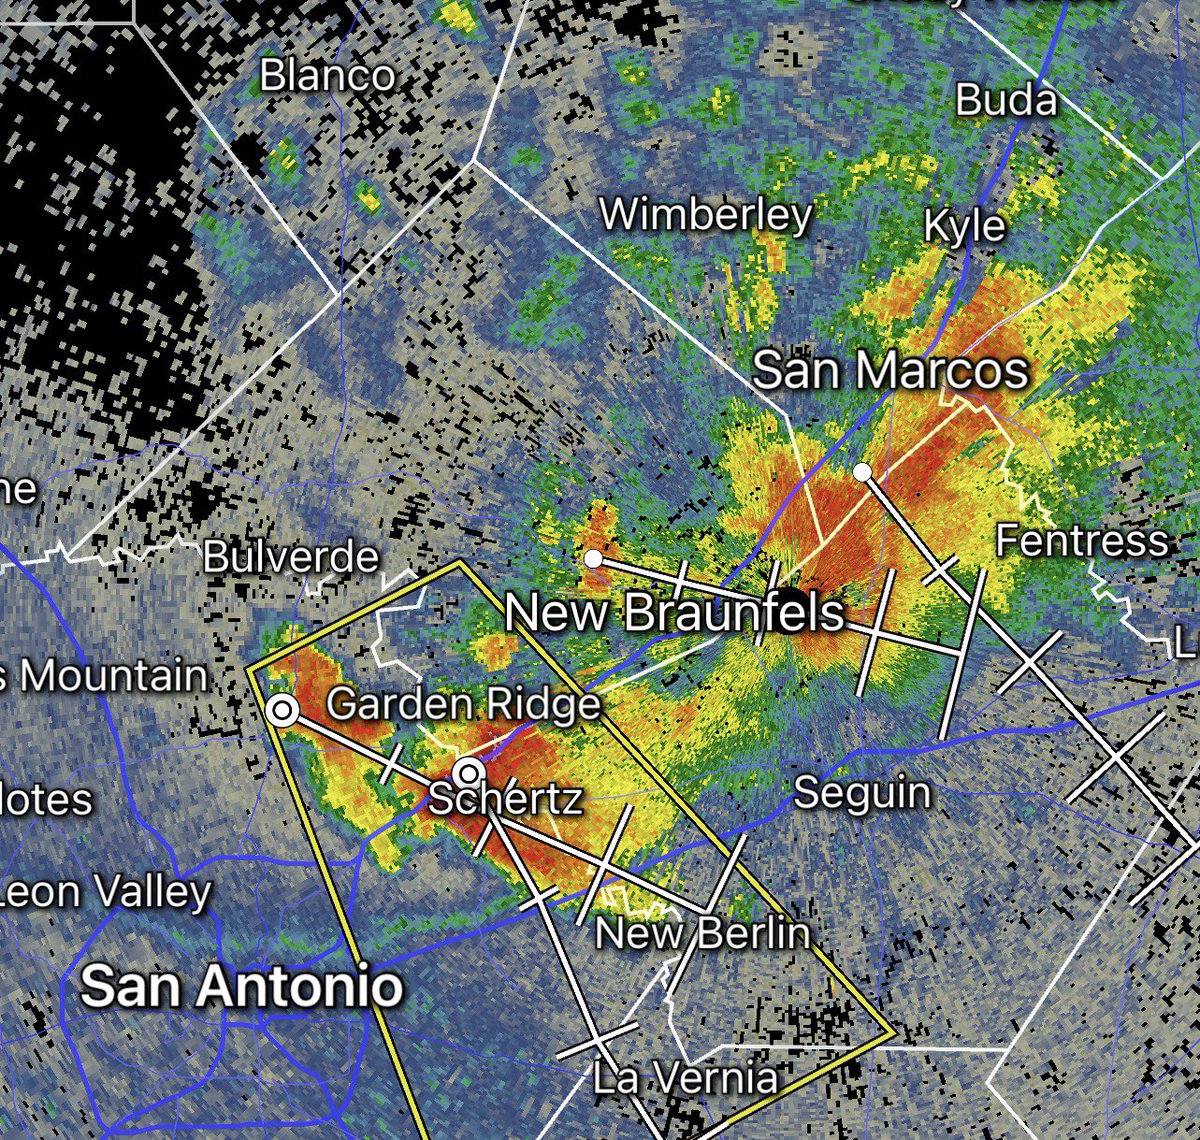 Severe Thunderstorm Warning for Southwestern Guadalupe, northwestern Wilson, eastern Bexar and south central Comal counties until 3:15. Storms moving southeast at 30 mph.